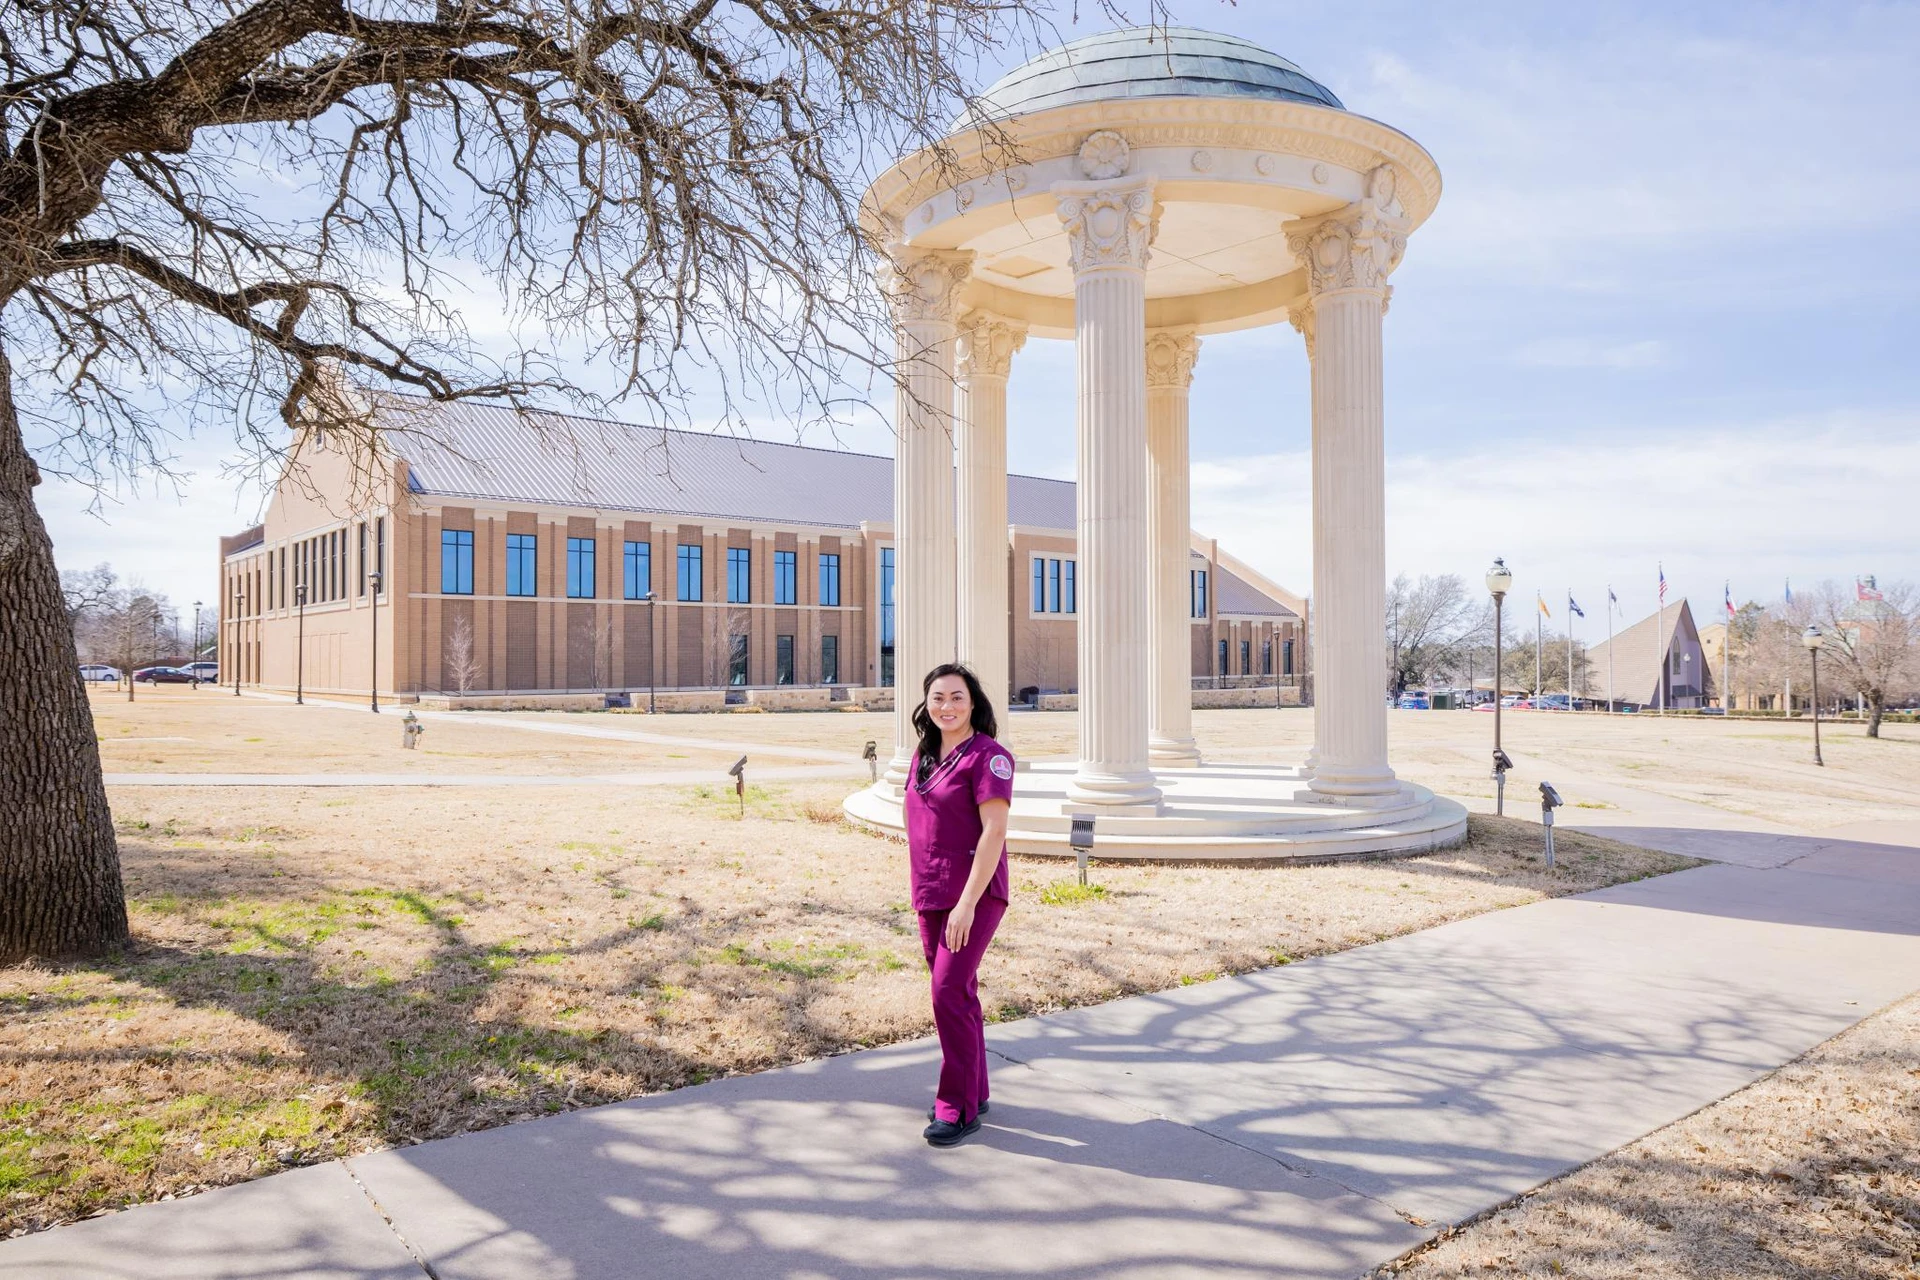 Linh Vu poses in SWAU scrubs in front of the rotunda with the nursing building in the background